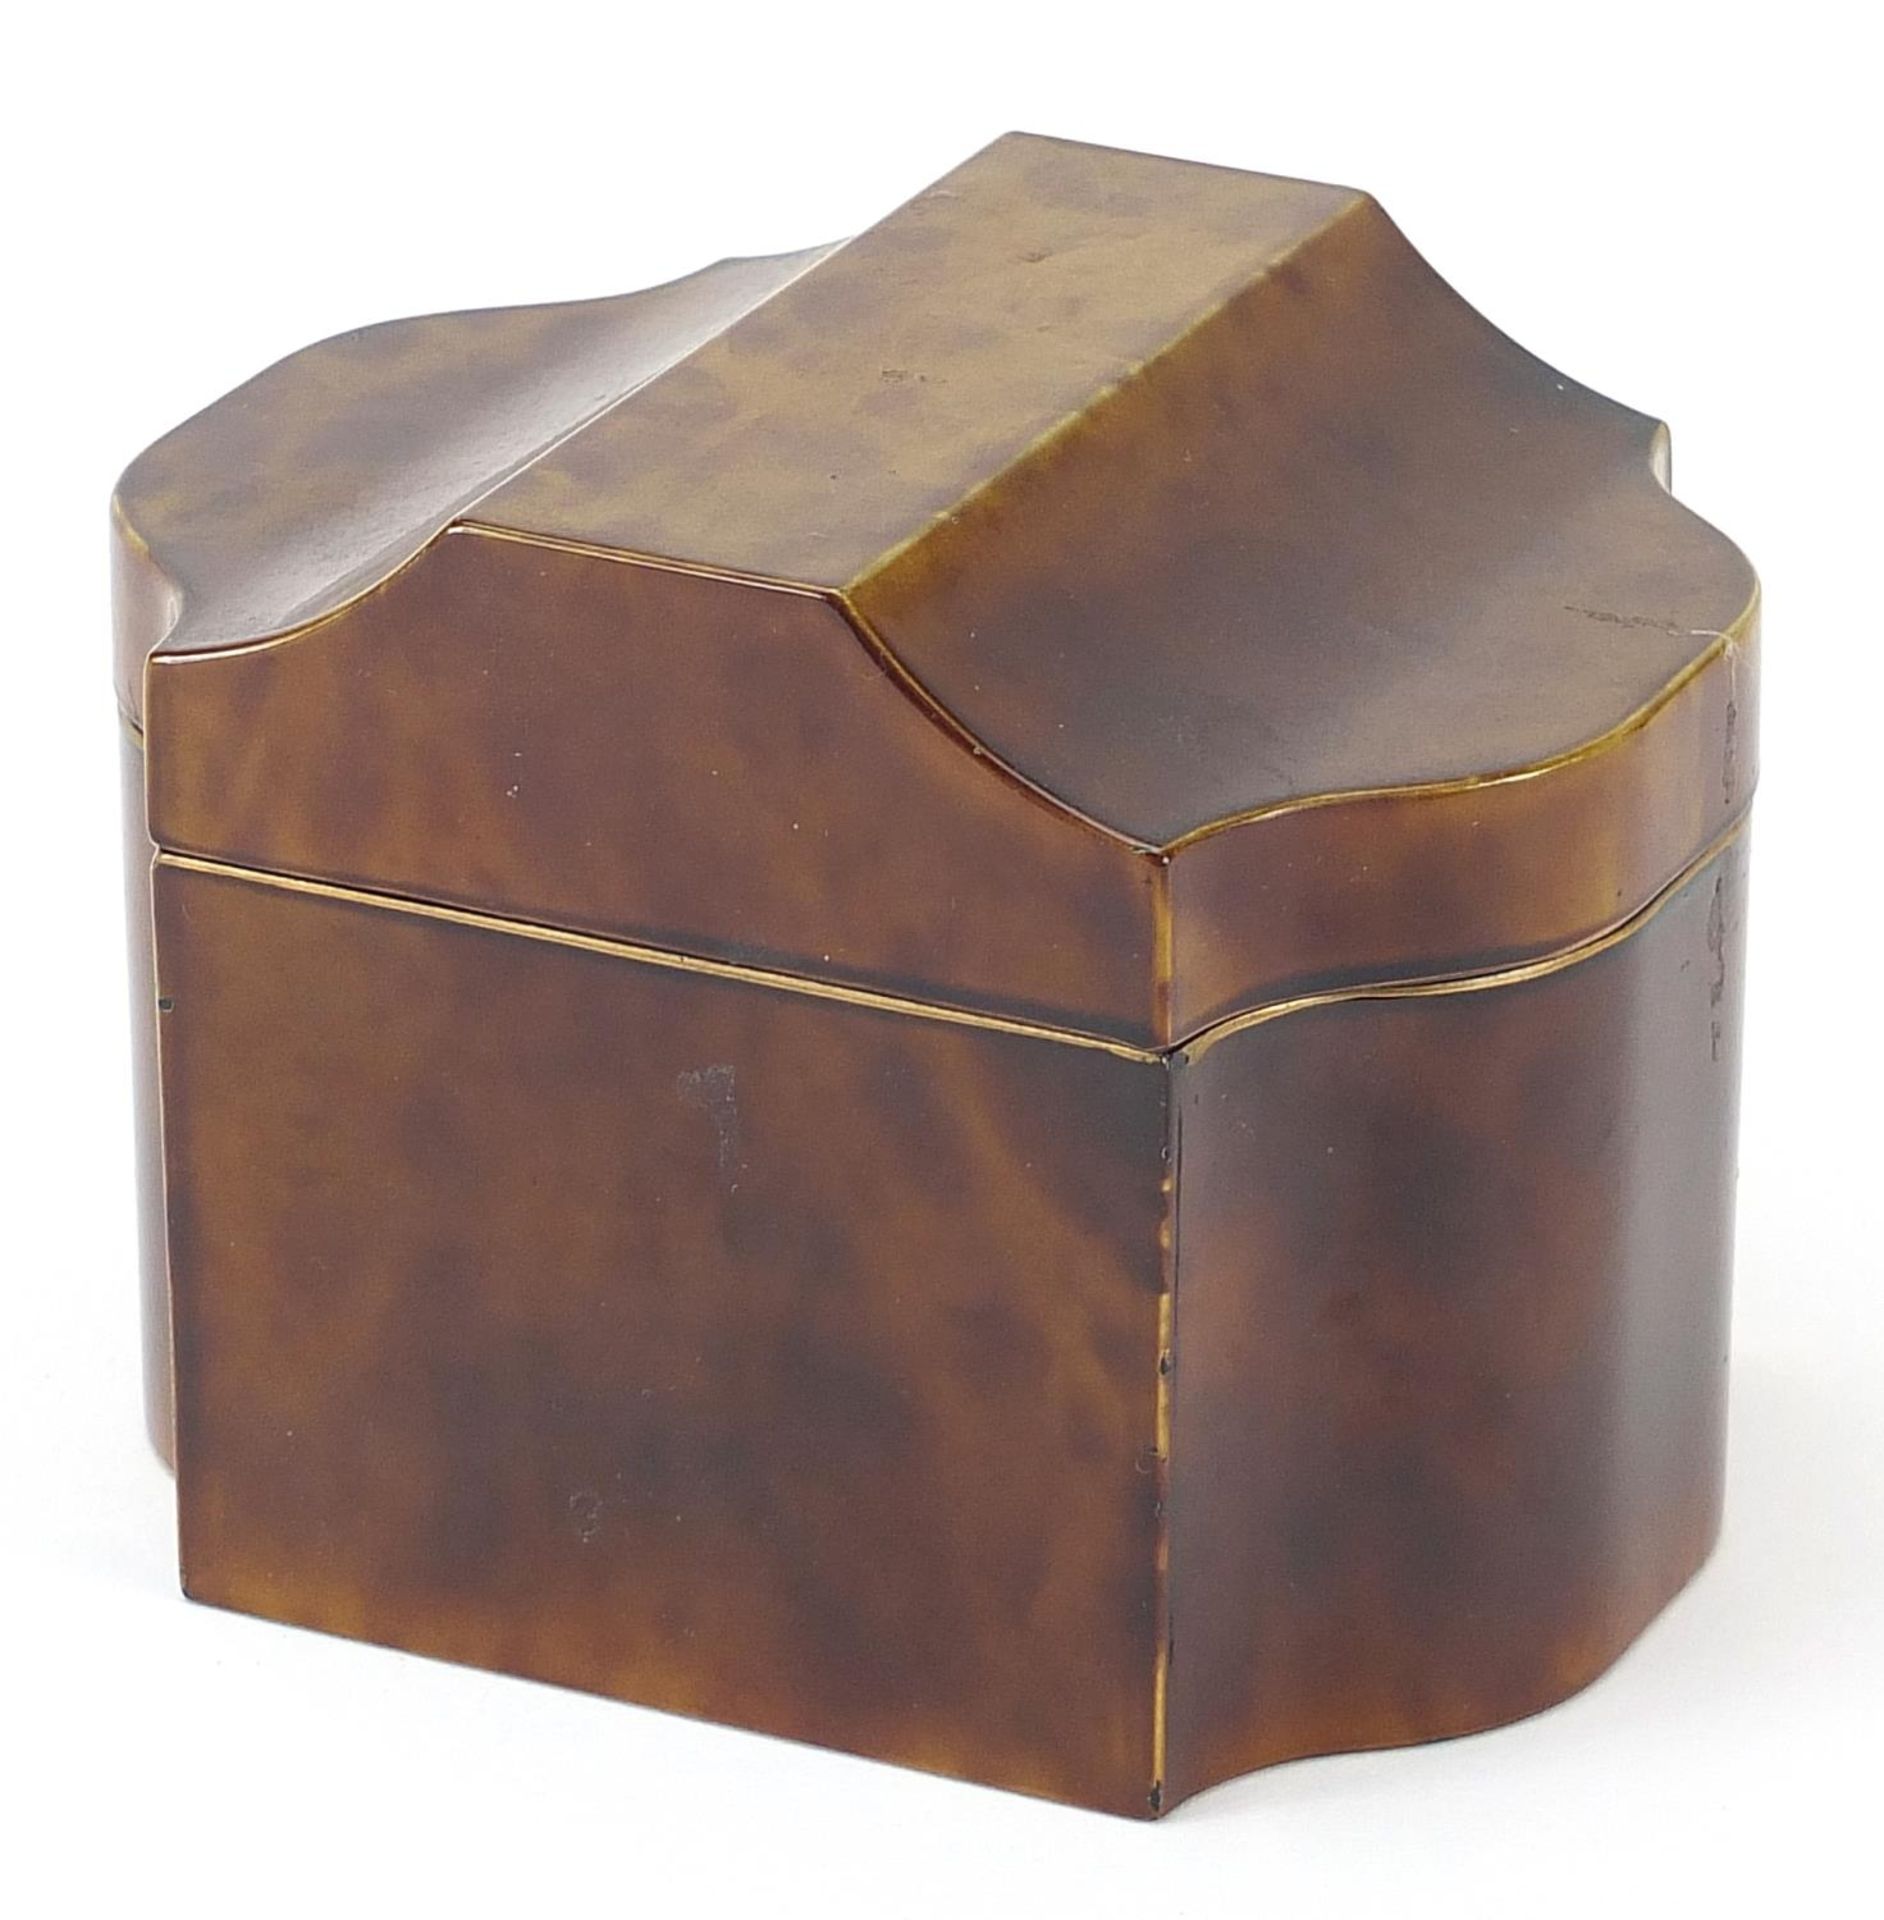 Faux tortoiseshell box and cover, 9cm H x 12cm W x 9cm D - Image 2 of 4